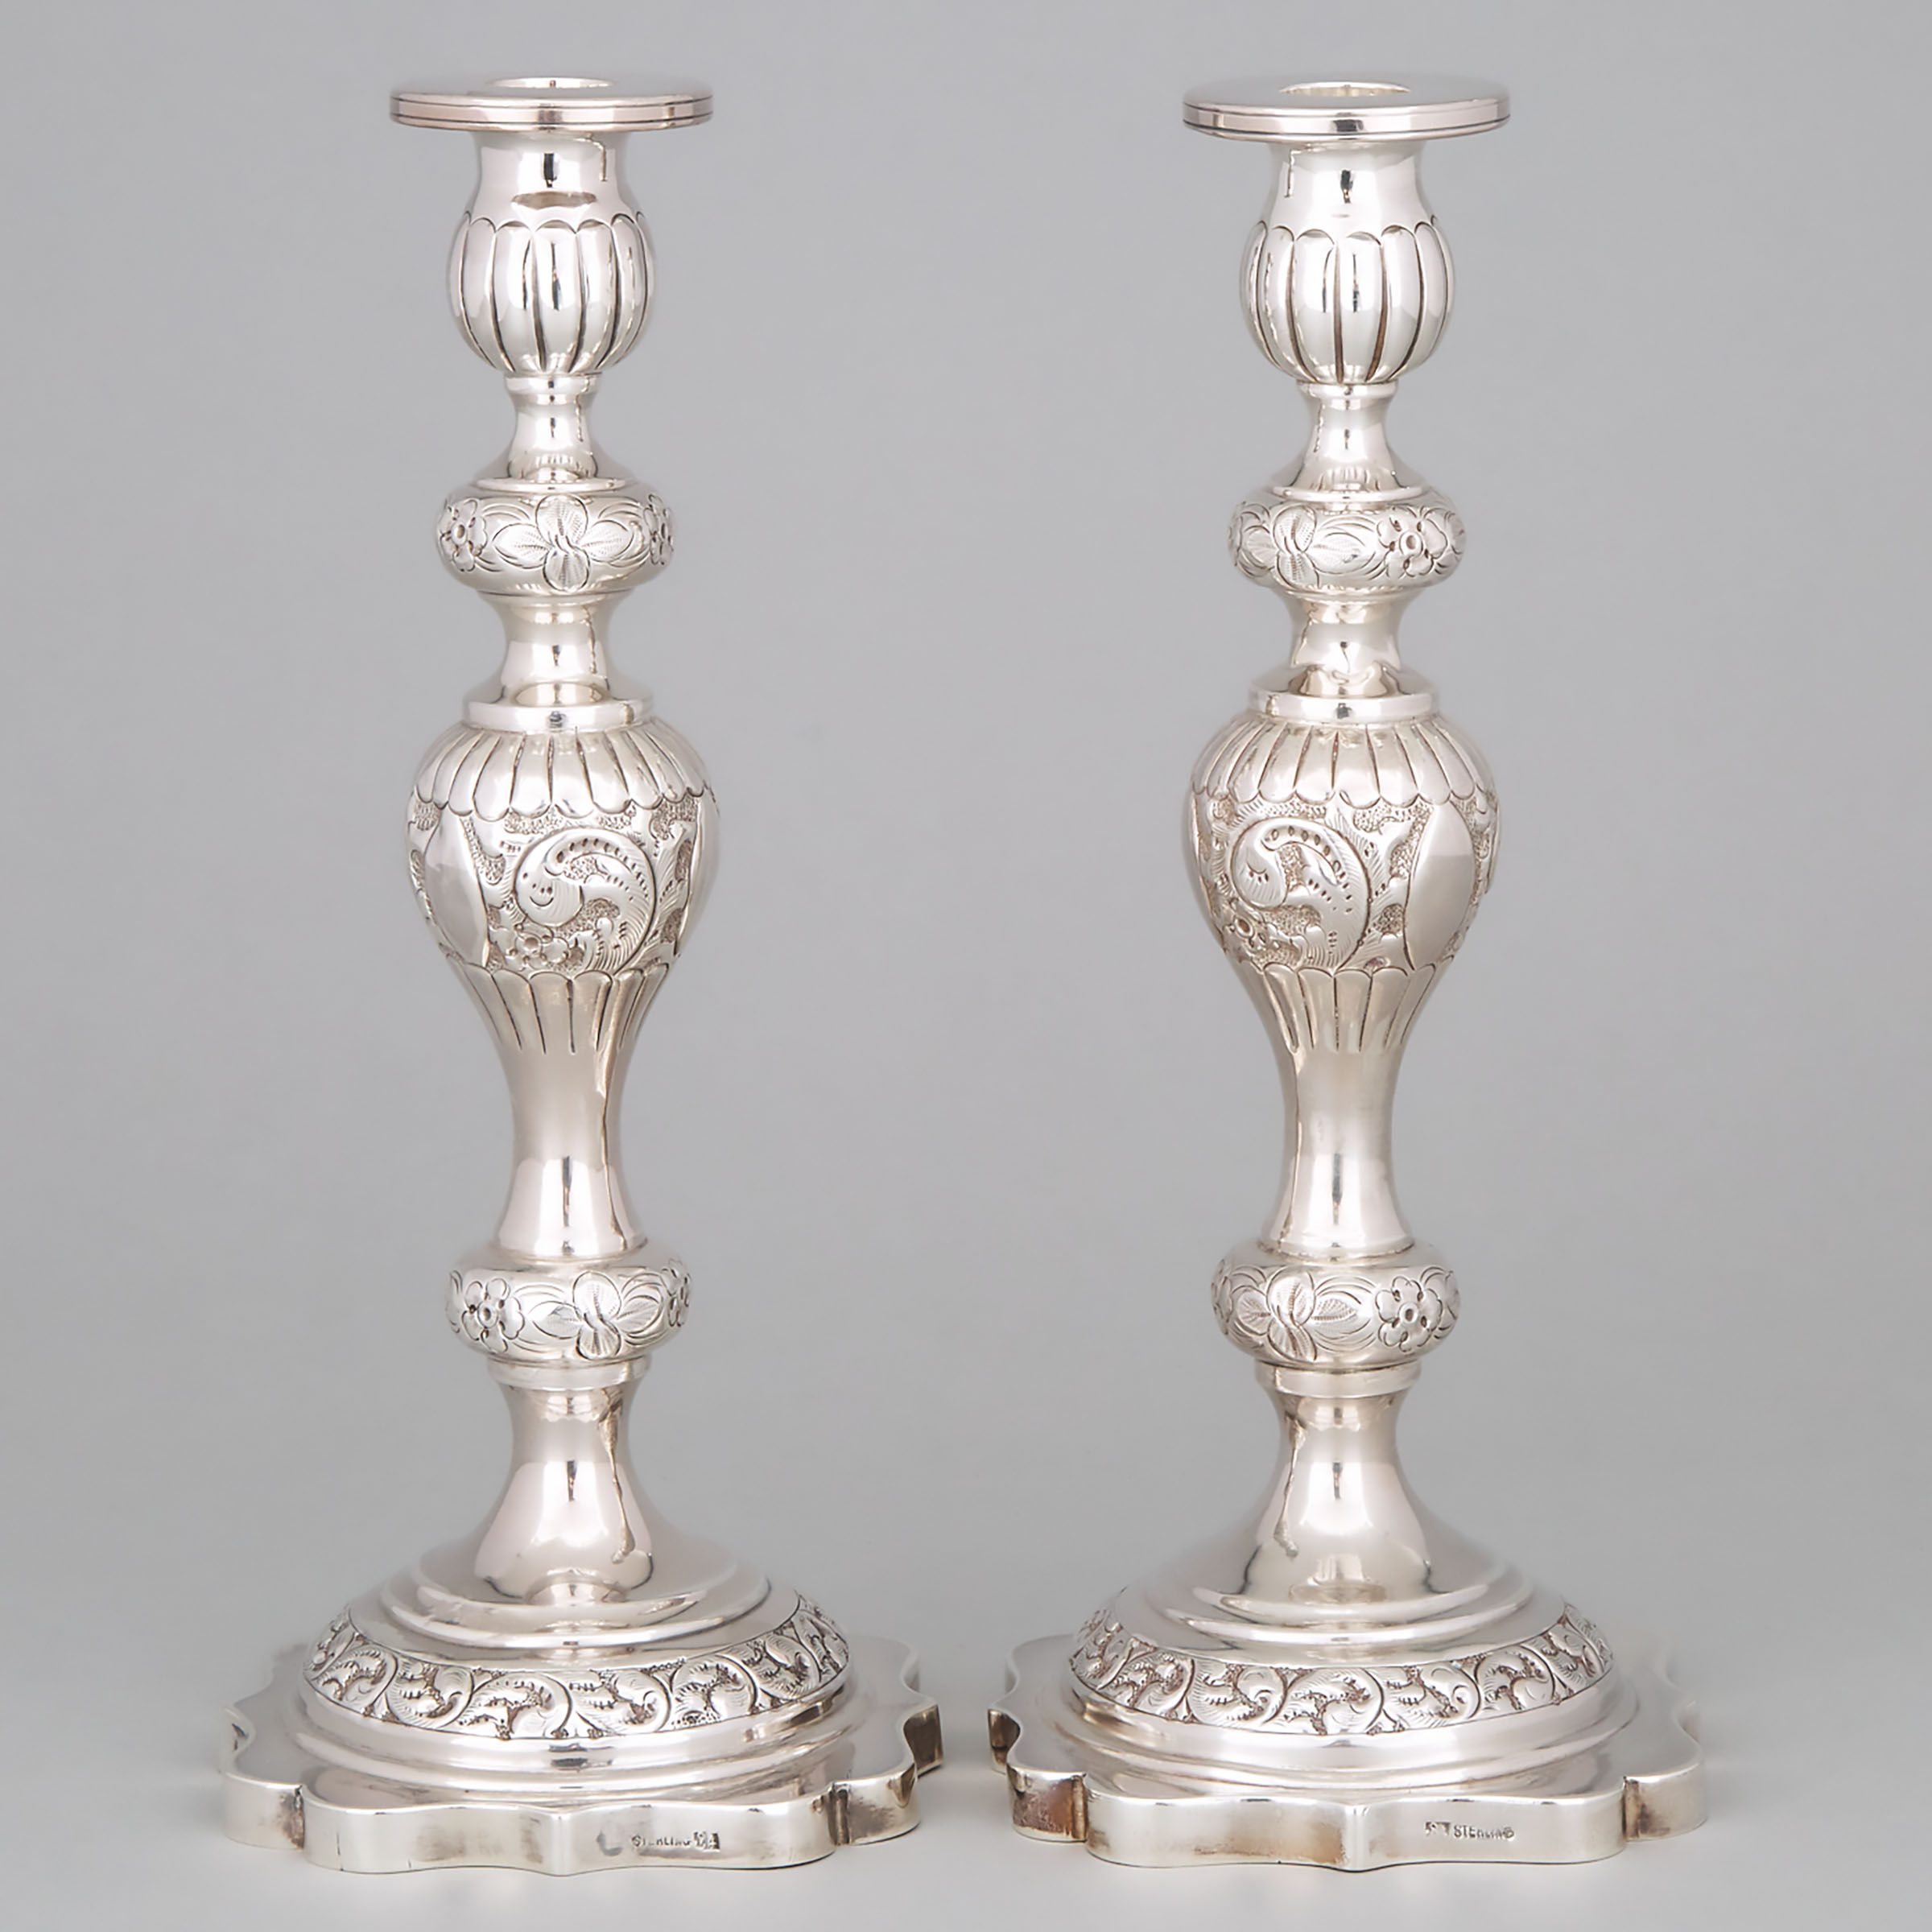 Pair of Eastern European Silver Table Candlesticks, early 20th century